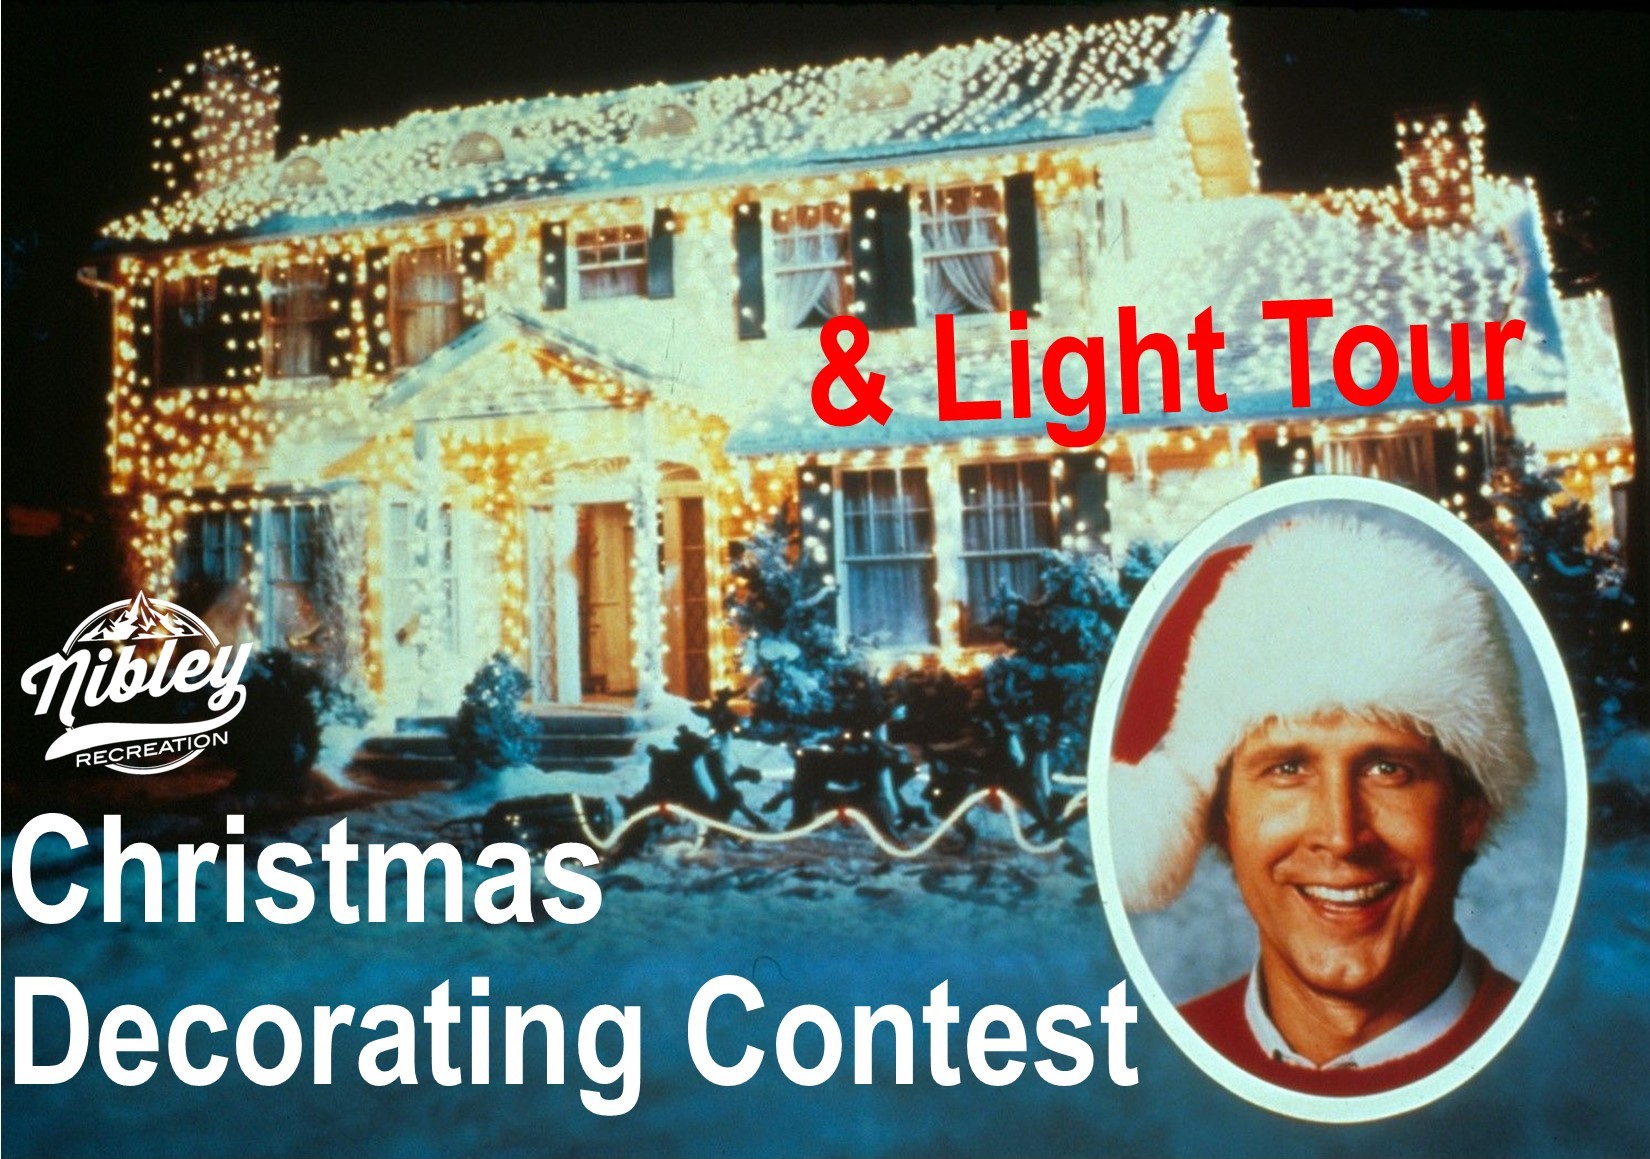 Christmas_Decorating_Contest_N_Light_Tour_Icon_Publisher.jpg